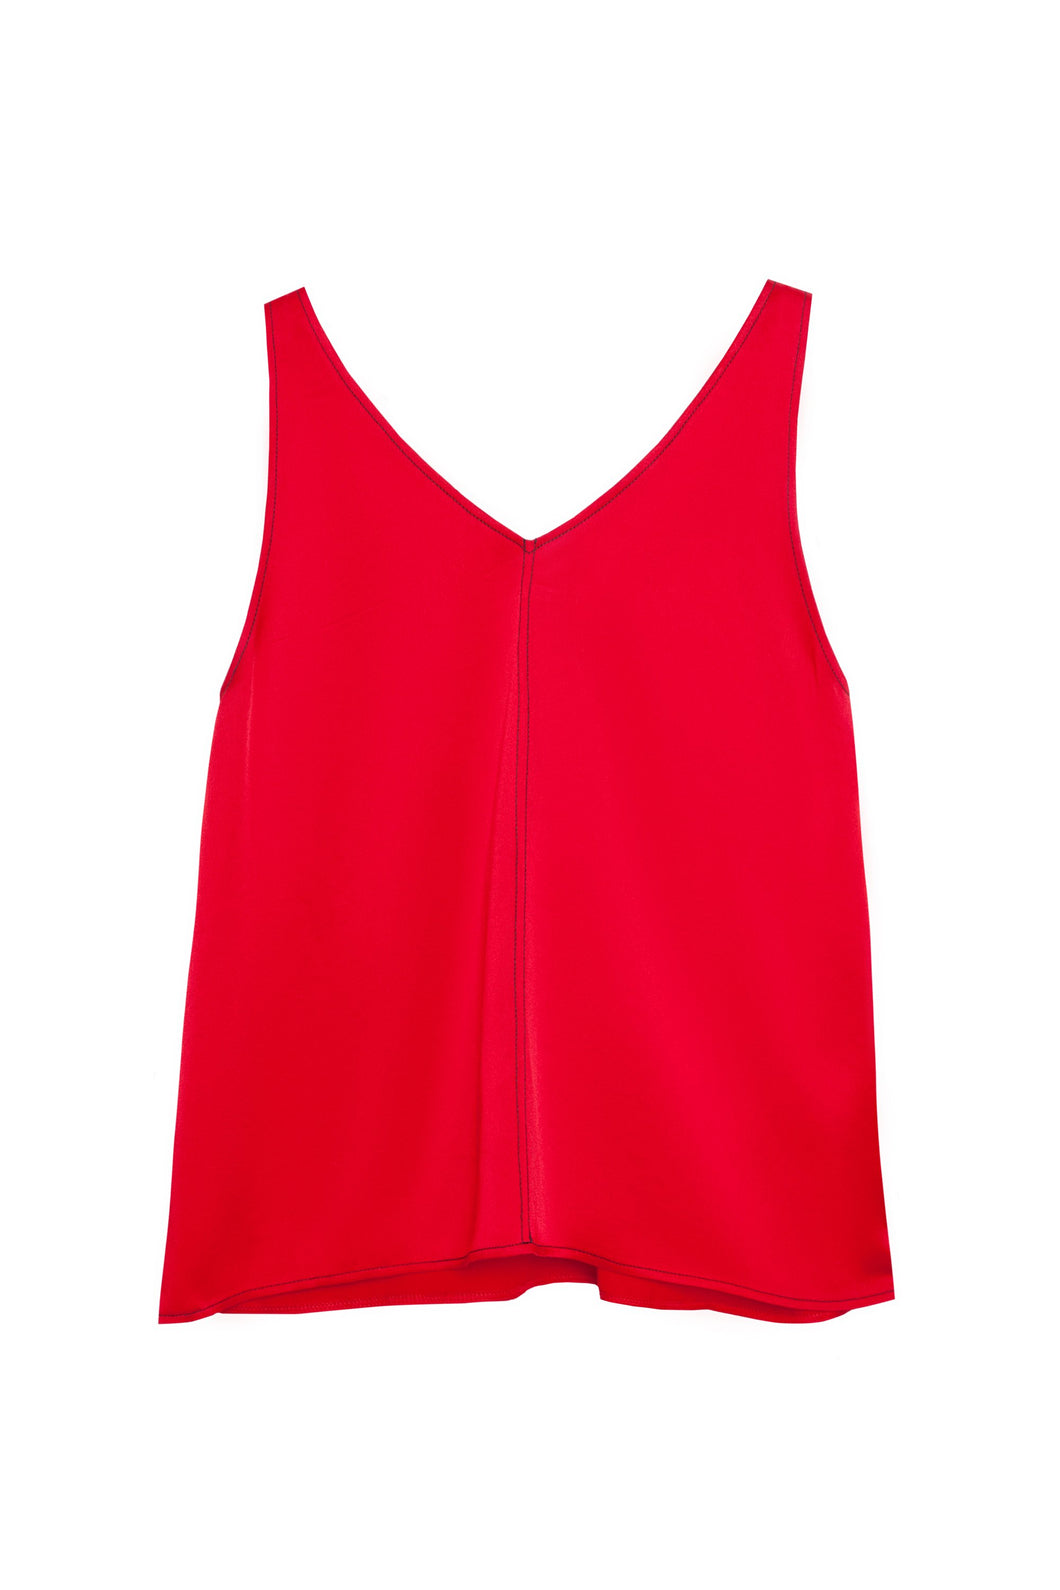 50% OFF  V- neck top with accent stitching red